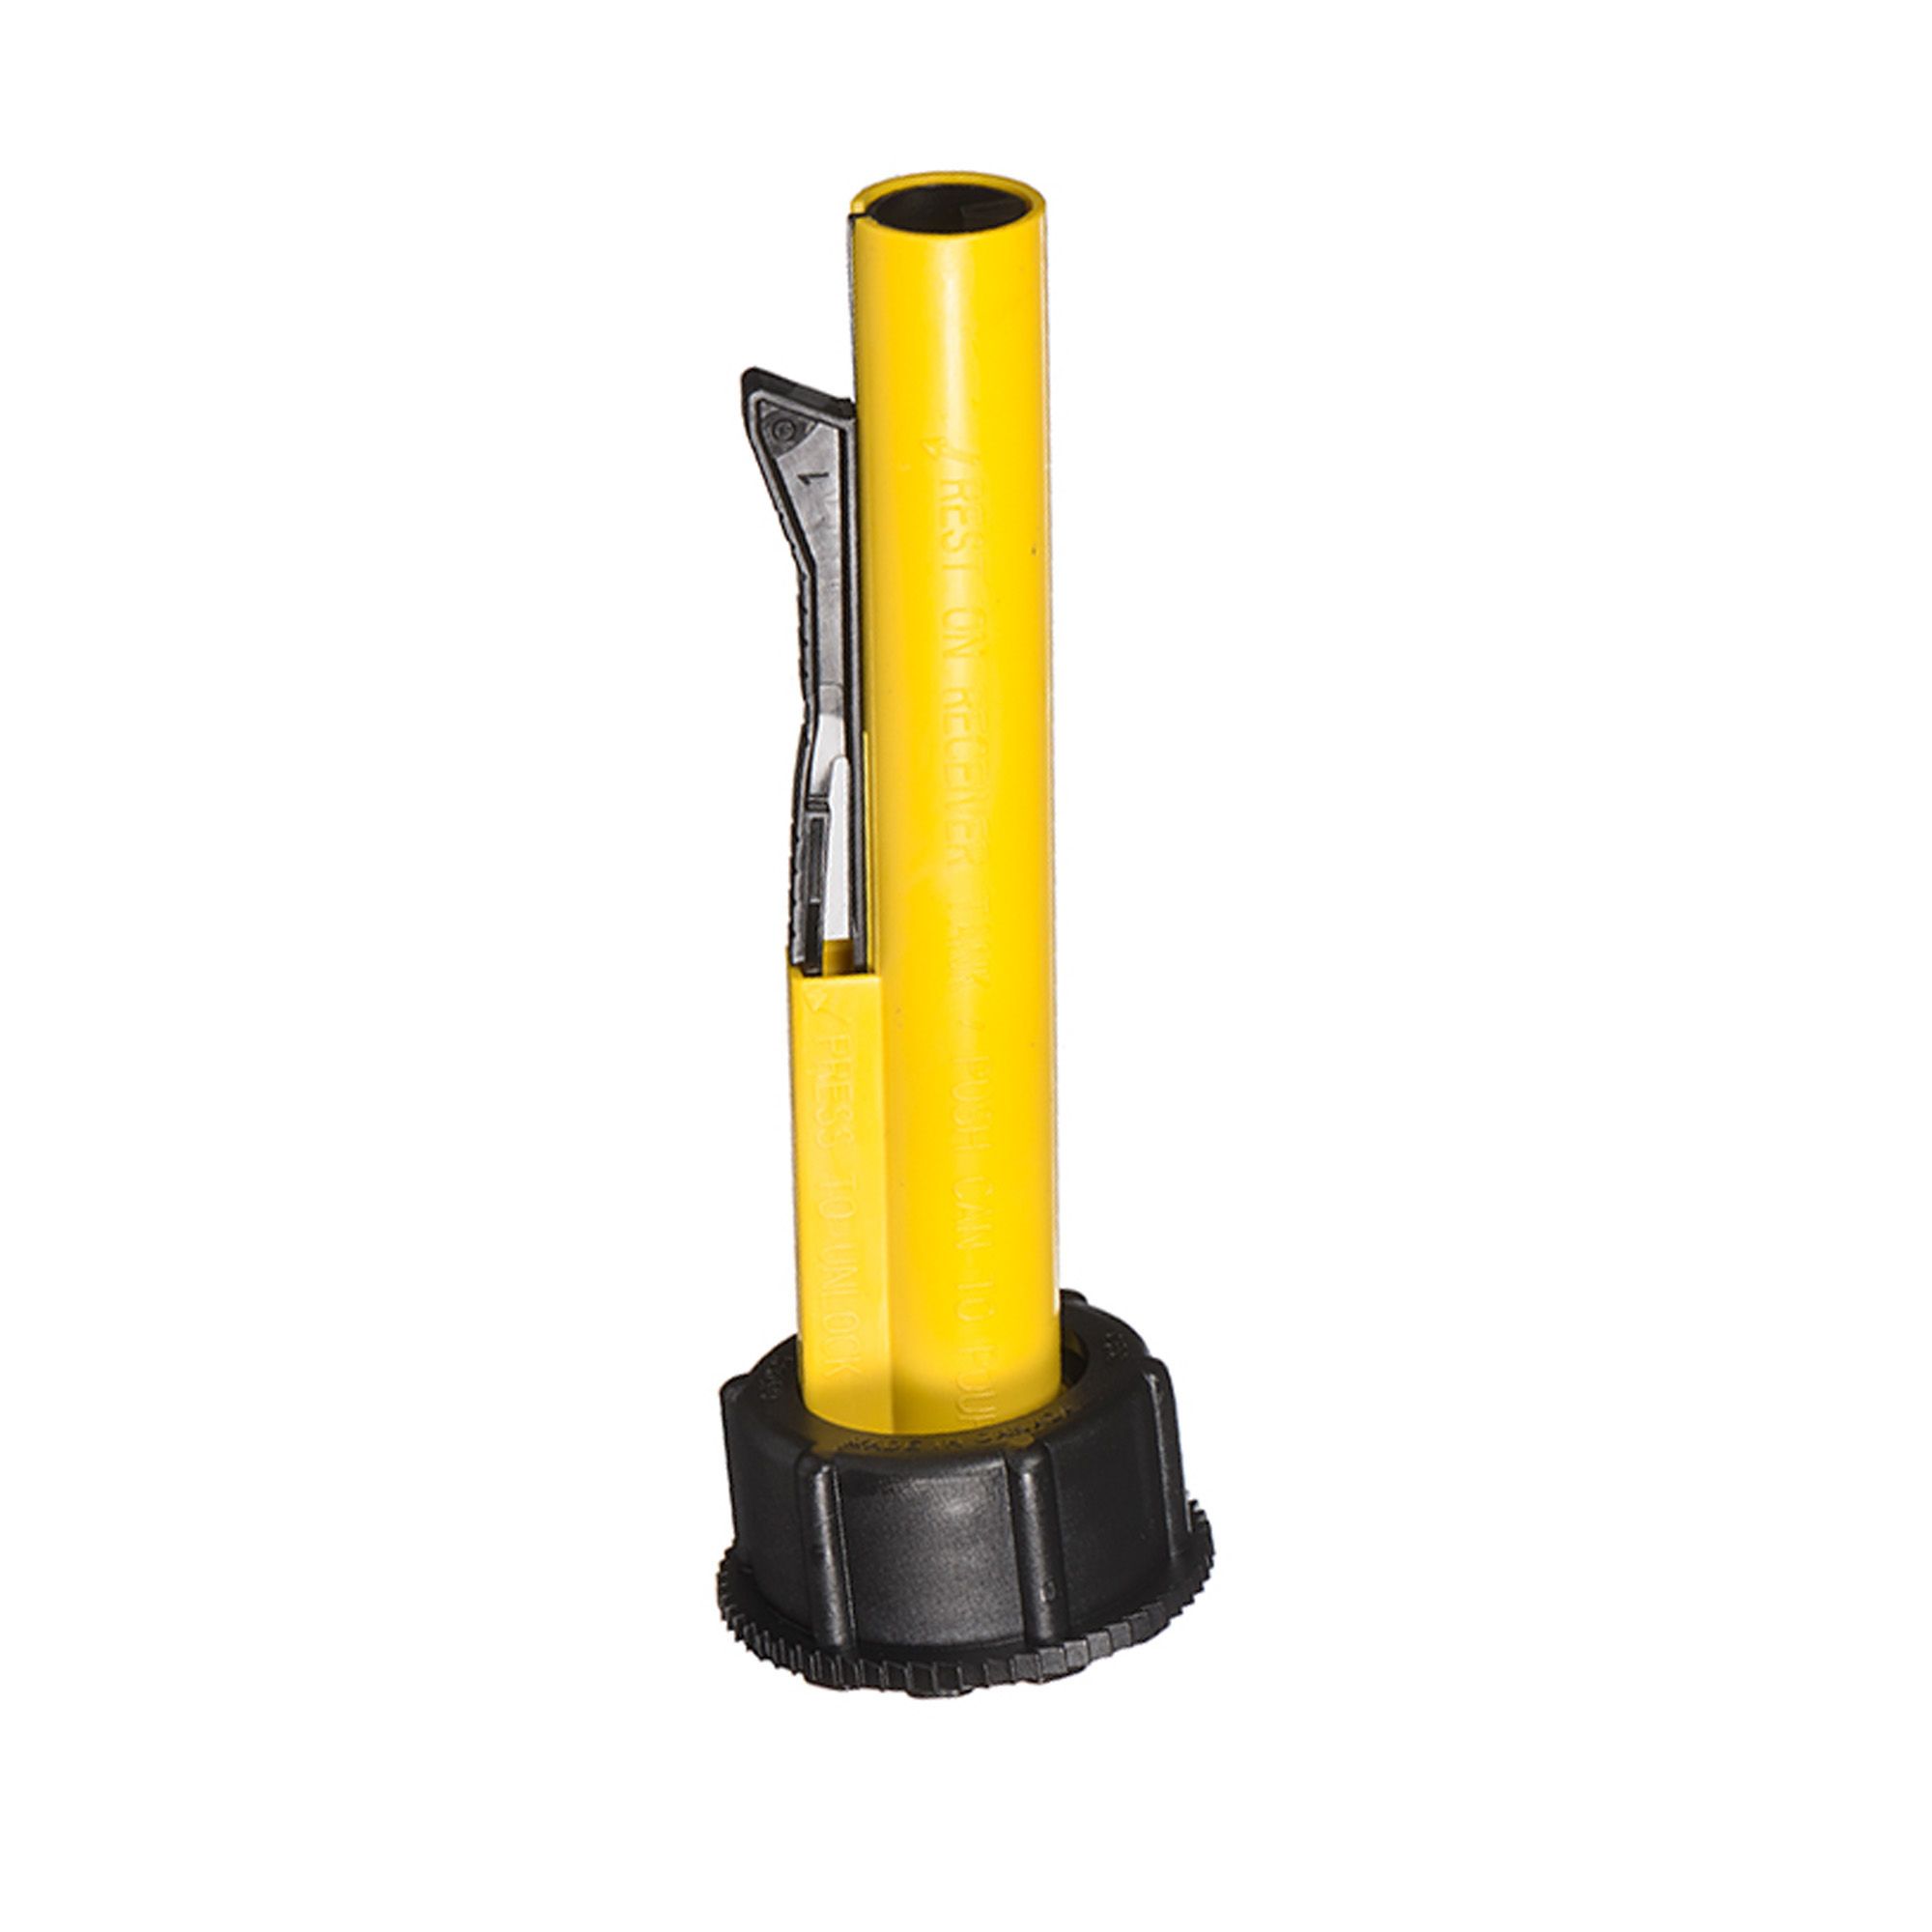 EPA Compliant Replacement Spout for Scepter & American Fuel Containers, Environmentally Safe, Reduces Emissions